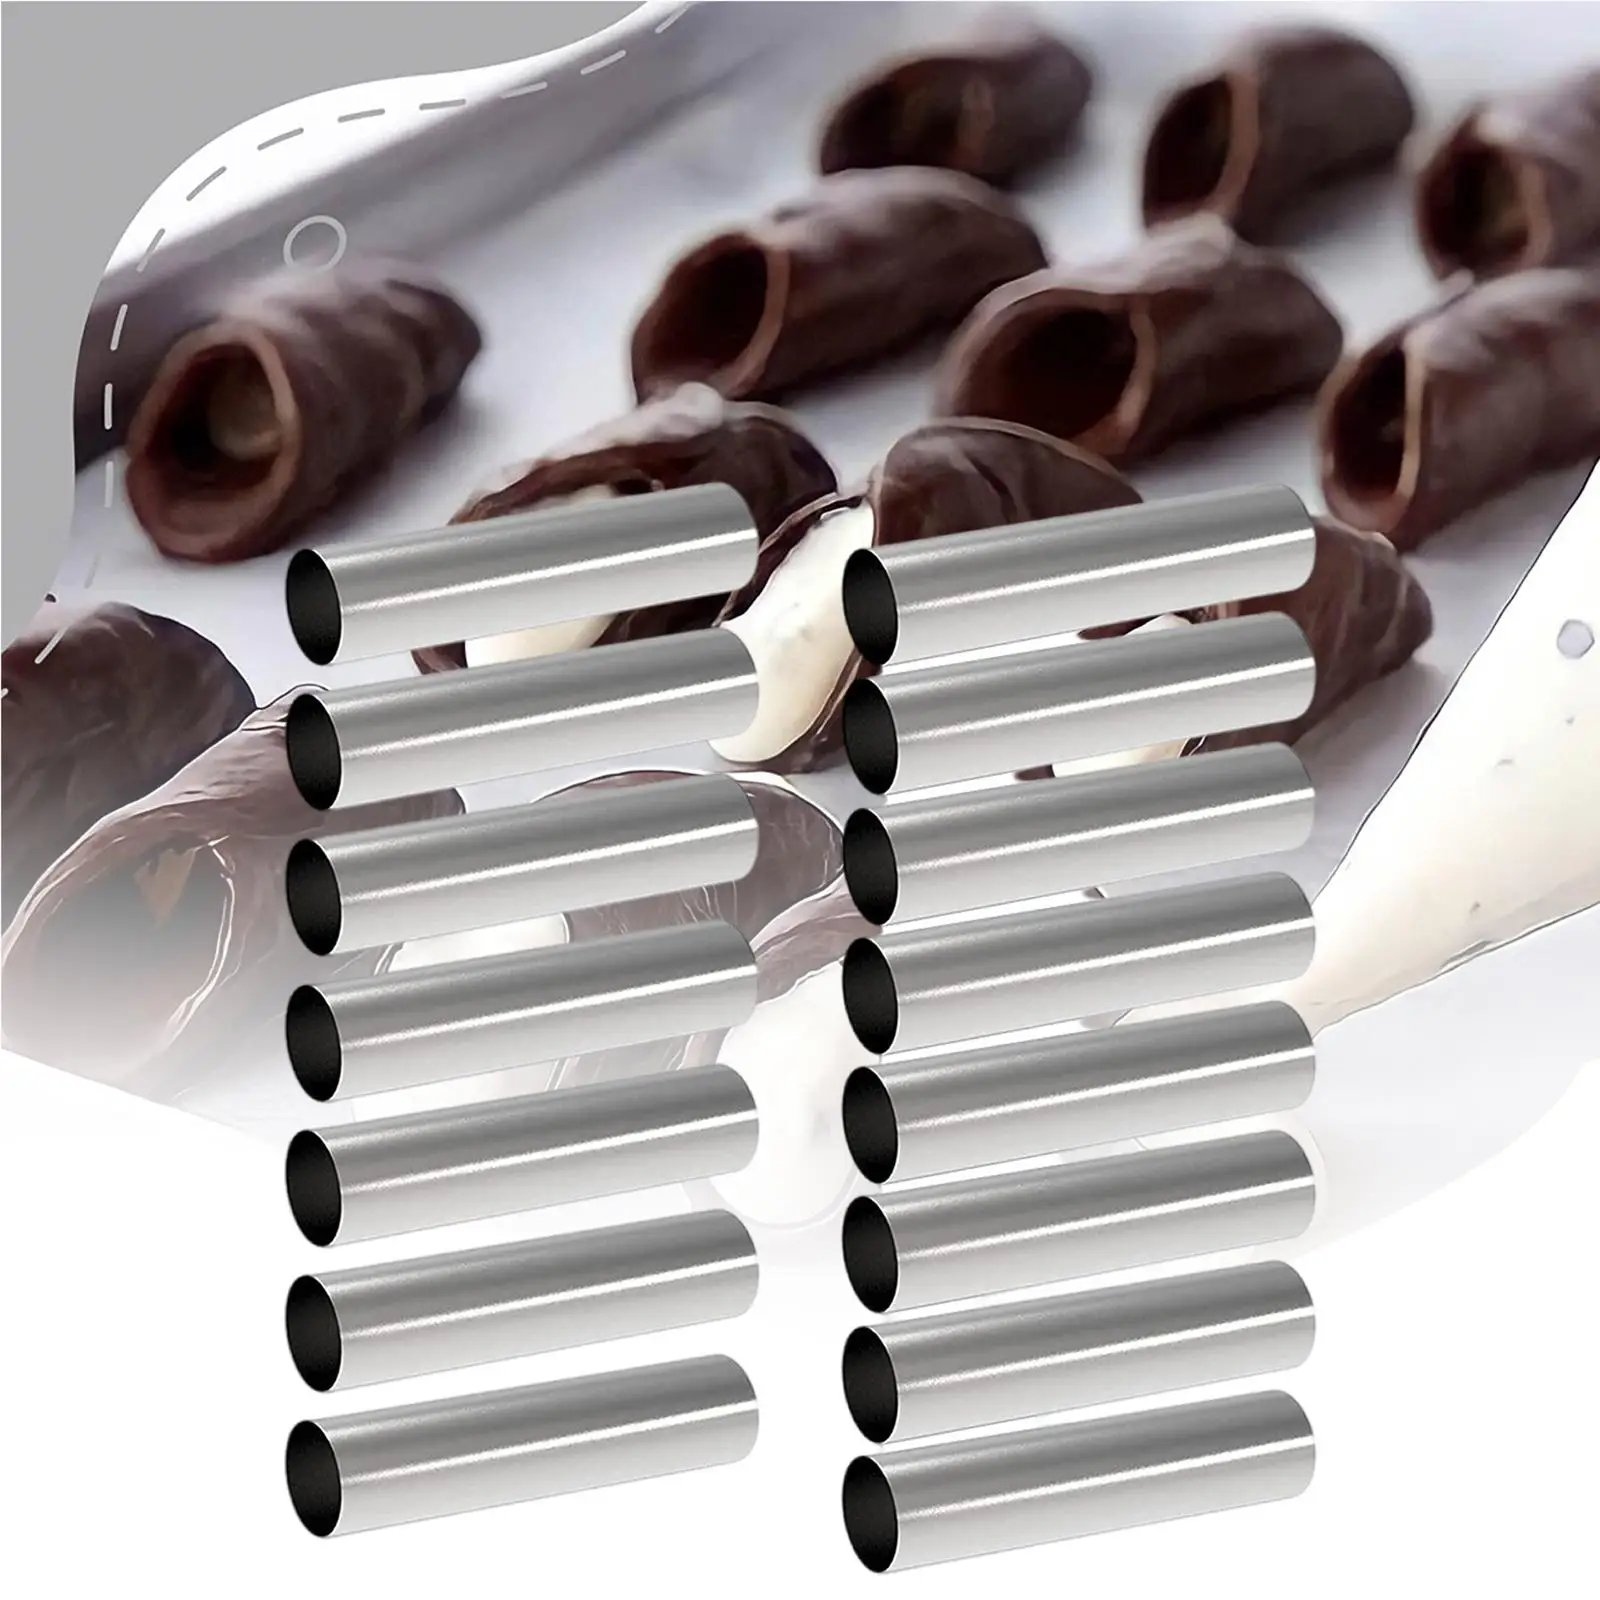 15x Stainless Steel Cannoli Form Tubes Baking Tools for Desserts Making Butter Horns Ice Cream Cones Pastry